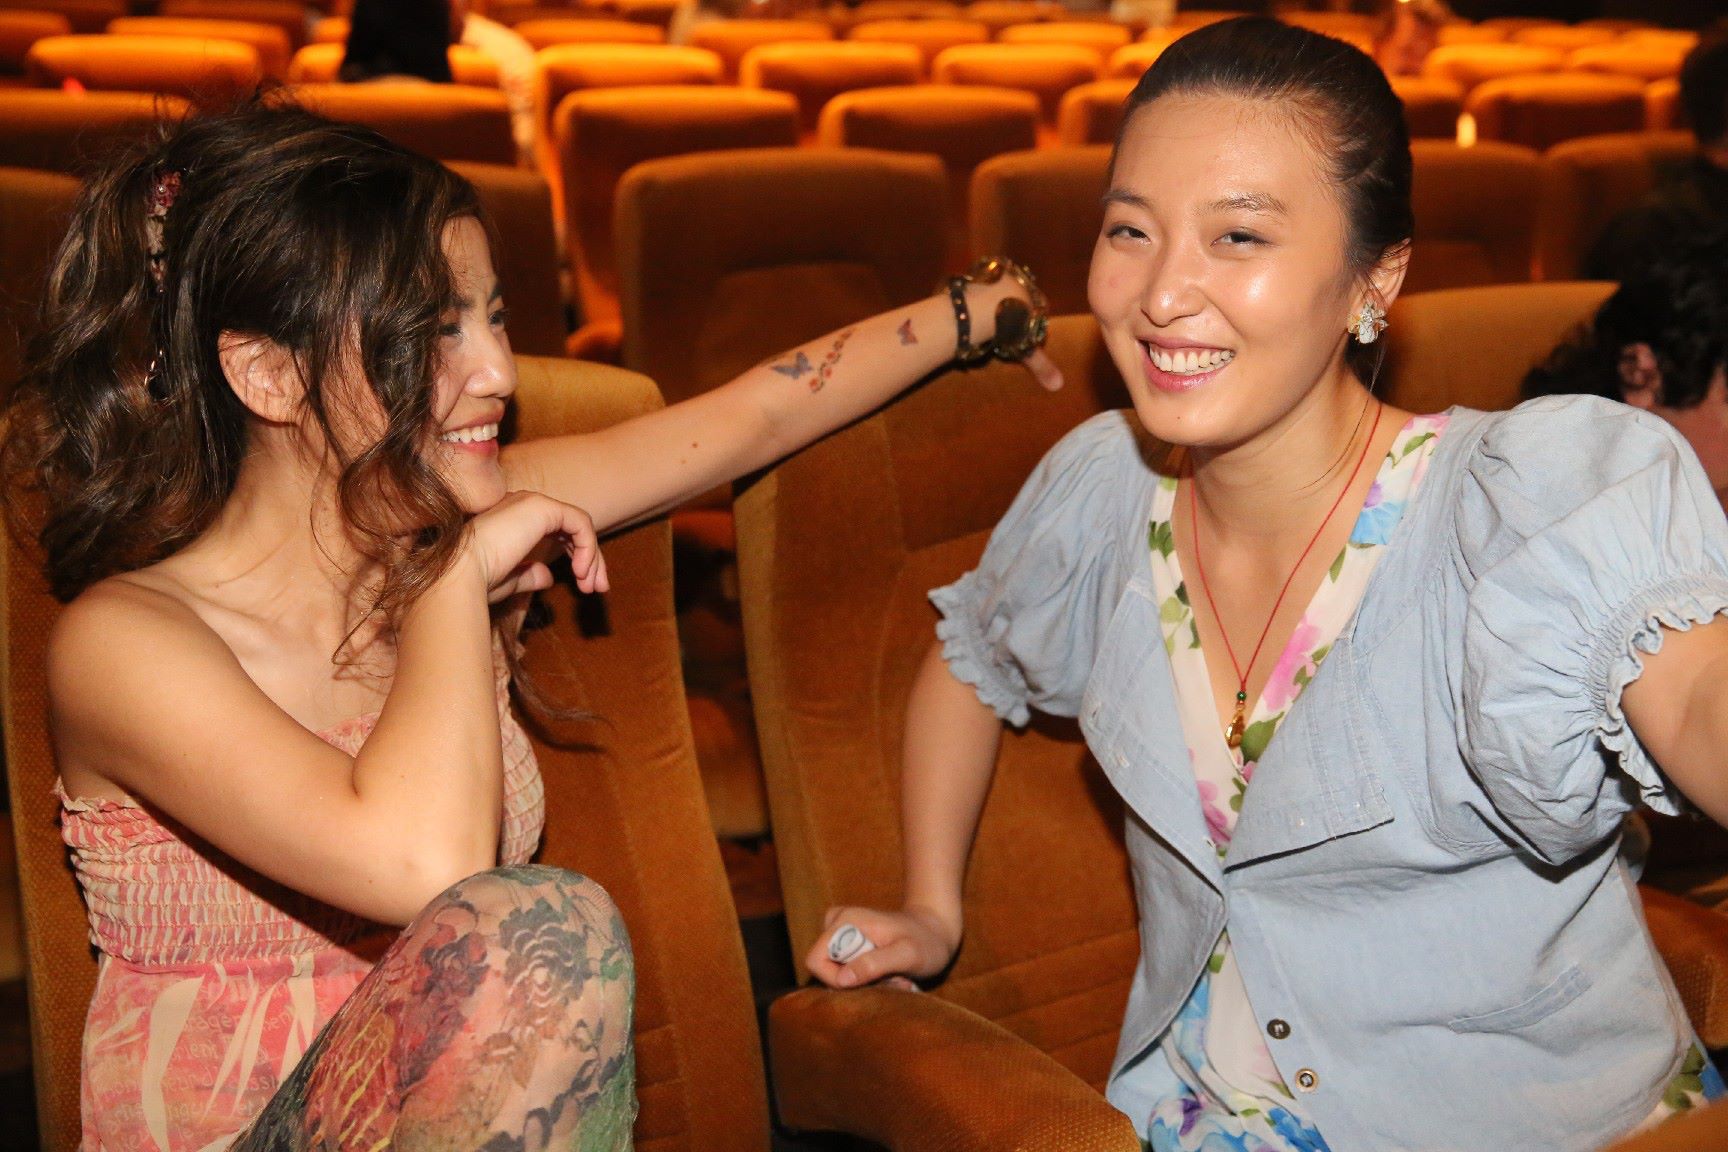 Director of Journey Song Song ( R ) & actress Nina Xining Zuo ( L )at Warner Brothers premiere of their film - journey, 6 - 21 - 2013, photo by Susan Li.